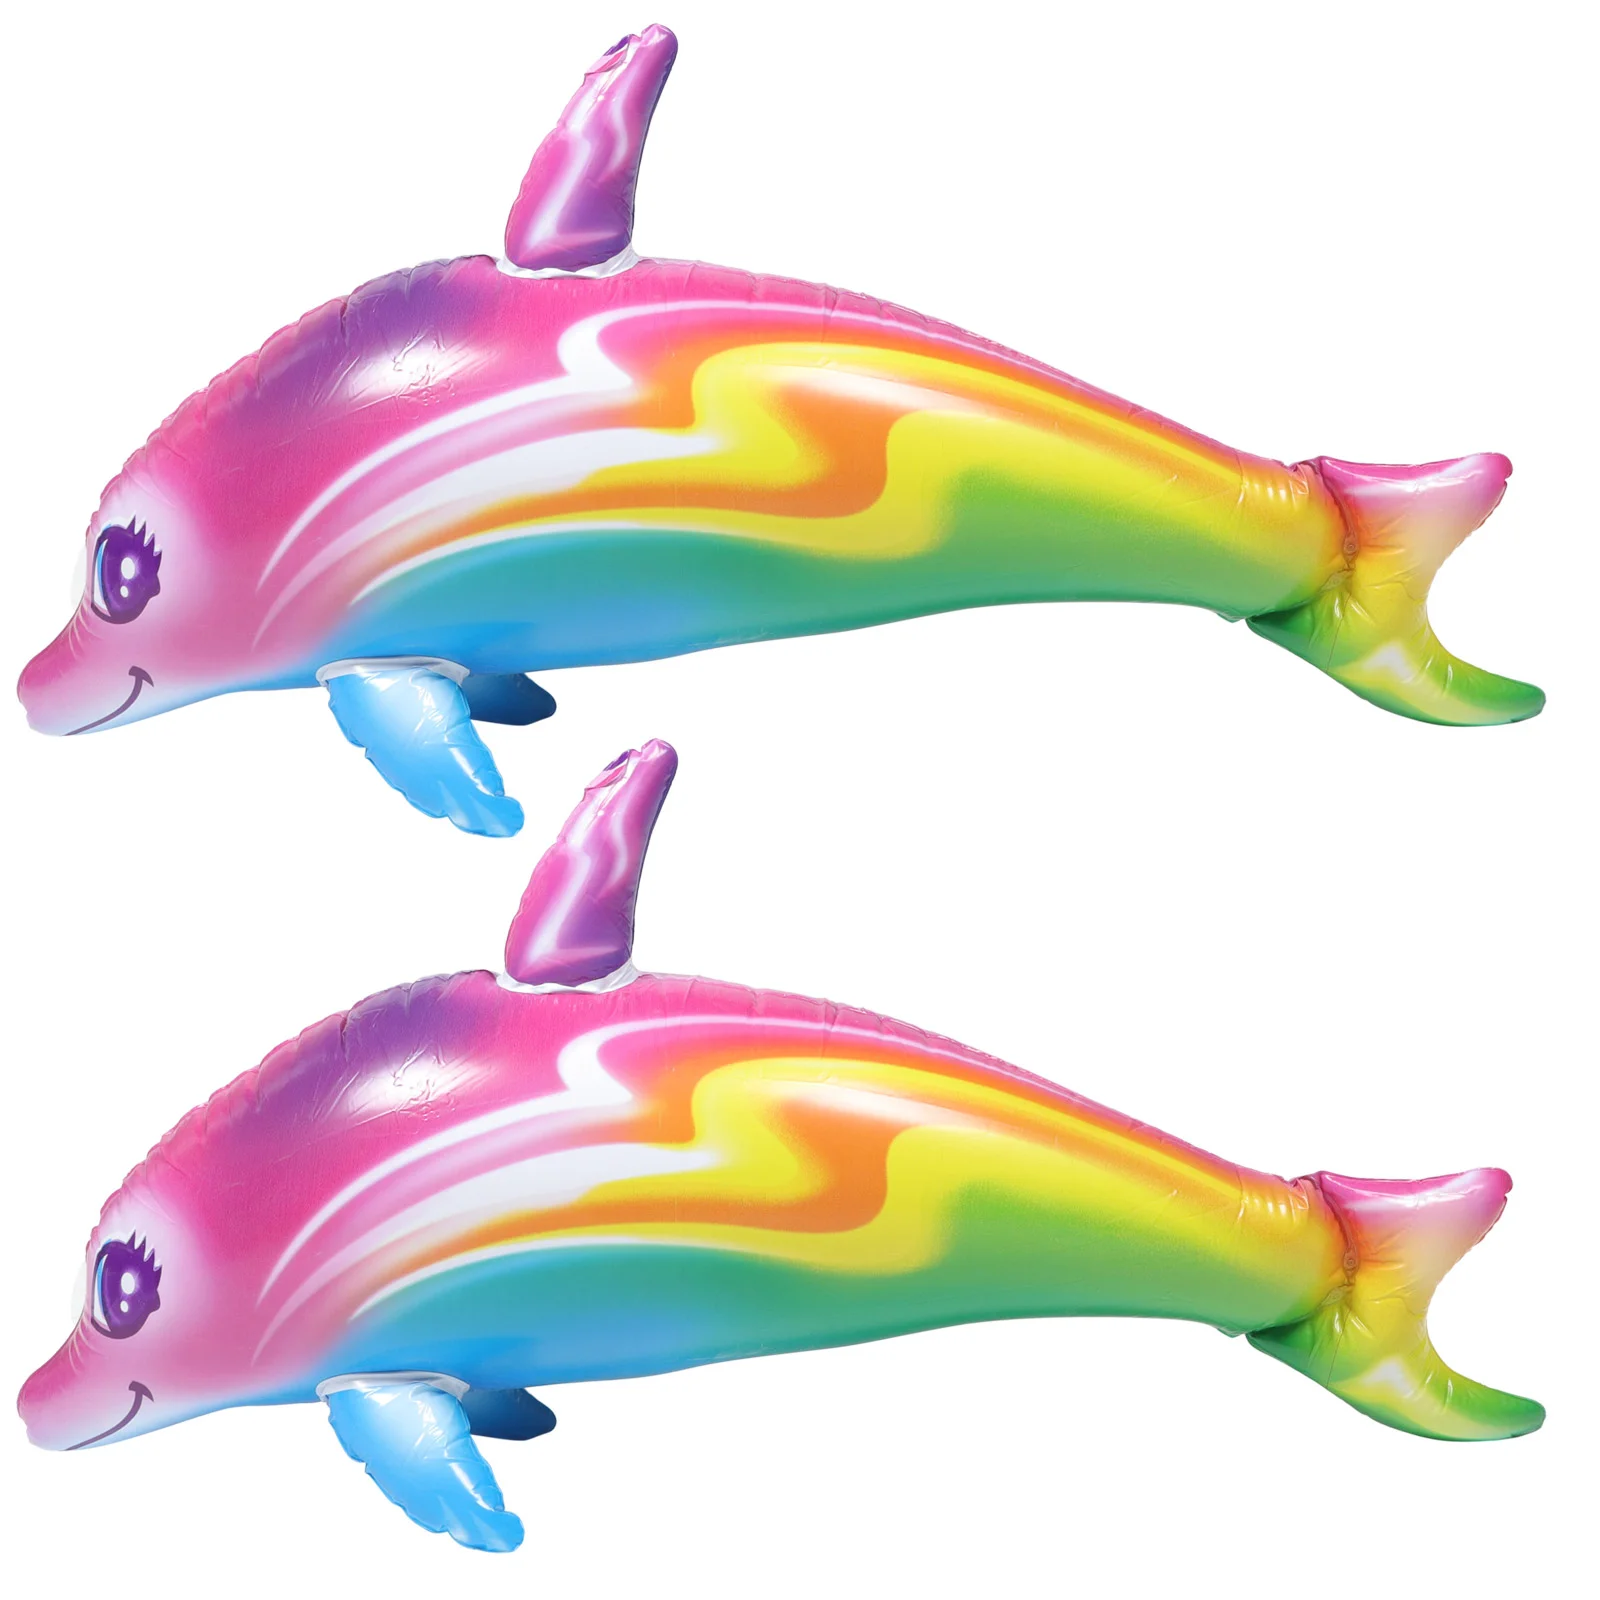 2 Pcs Inflatable Dolphin Toy Party Favors Giant Balloon Pool Game Pvc Child - $16.81